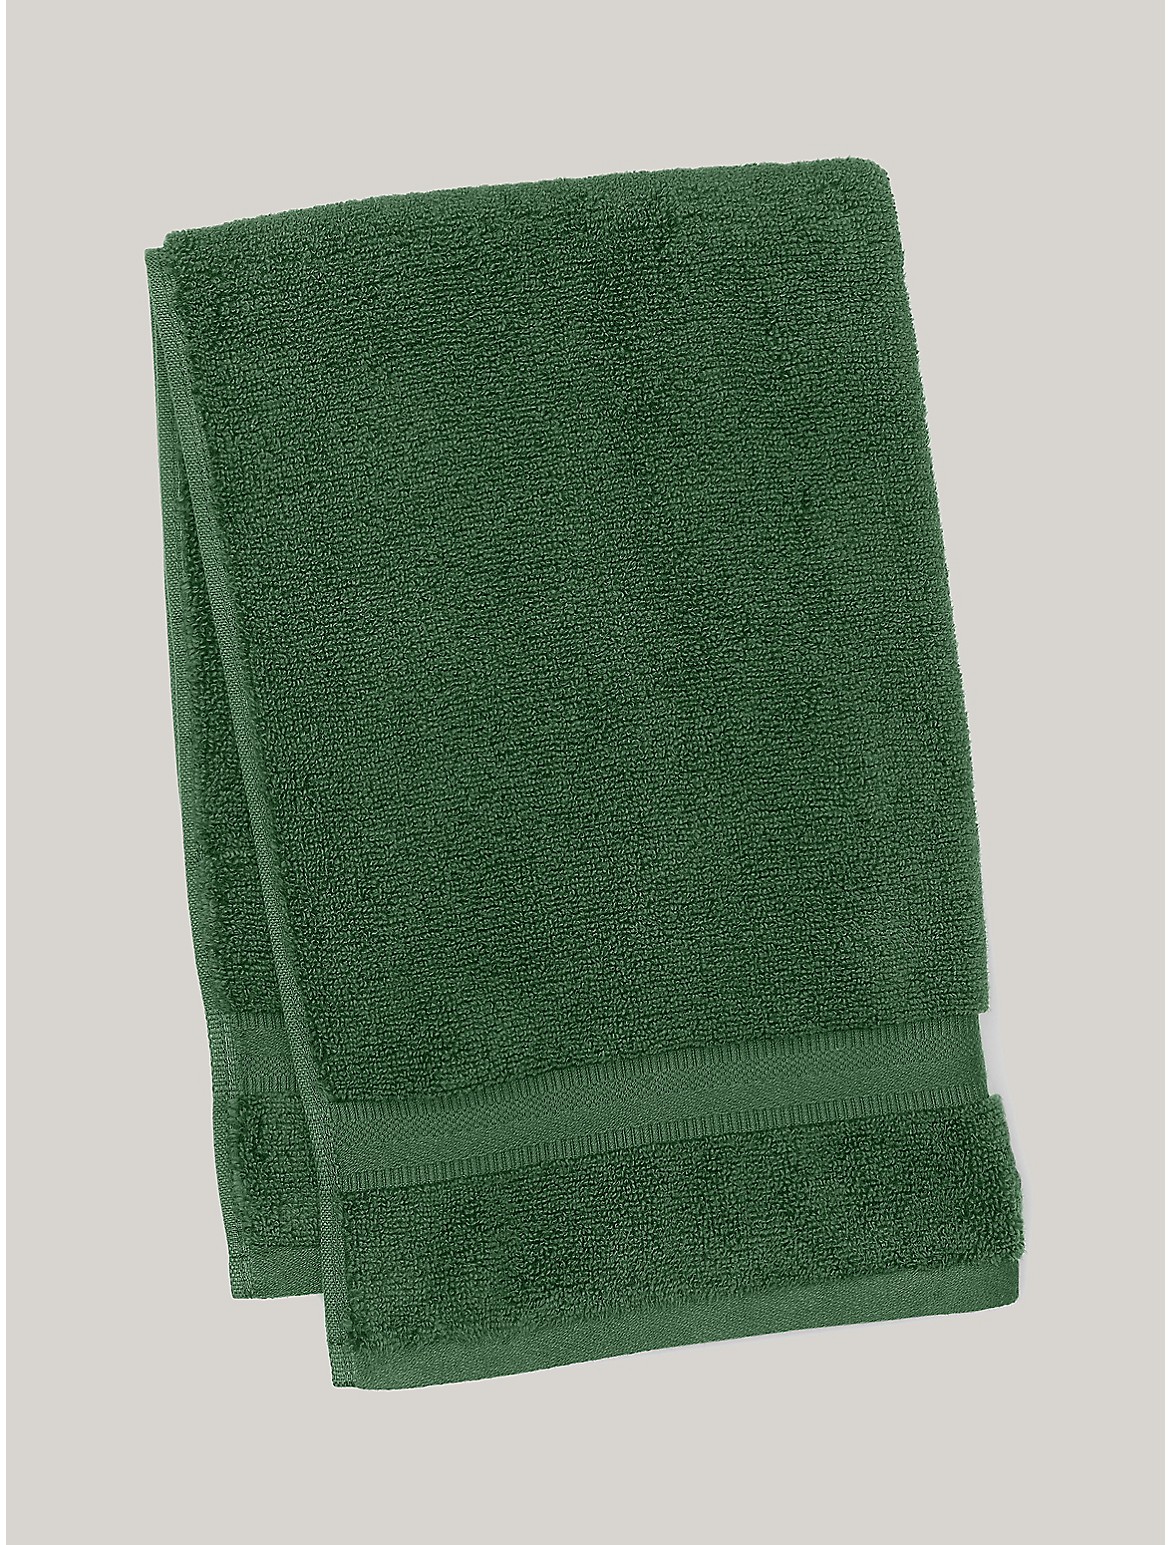 Tommy Hilfiger Signature Solid Hand Towel in Pine Needle - Green